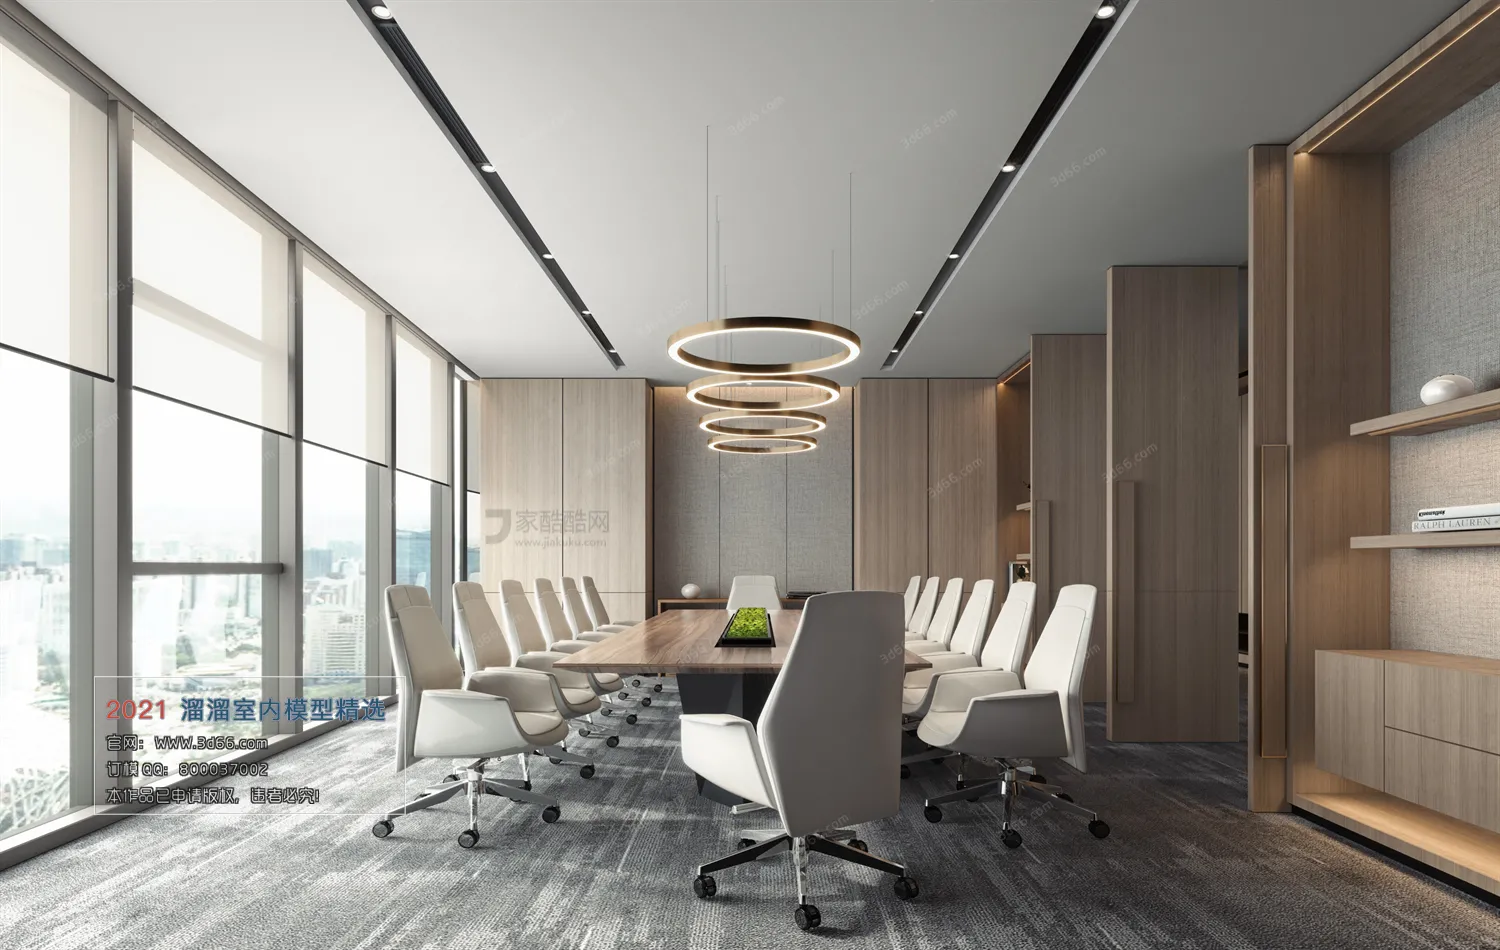 OFFICE, MEETING – A014-Modern style-Vray model